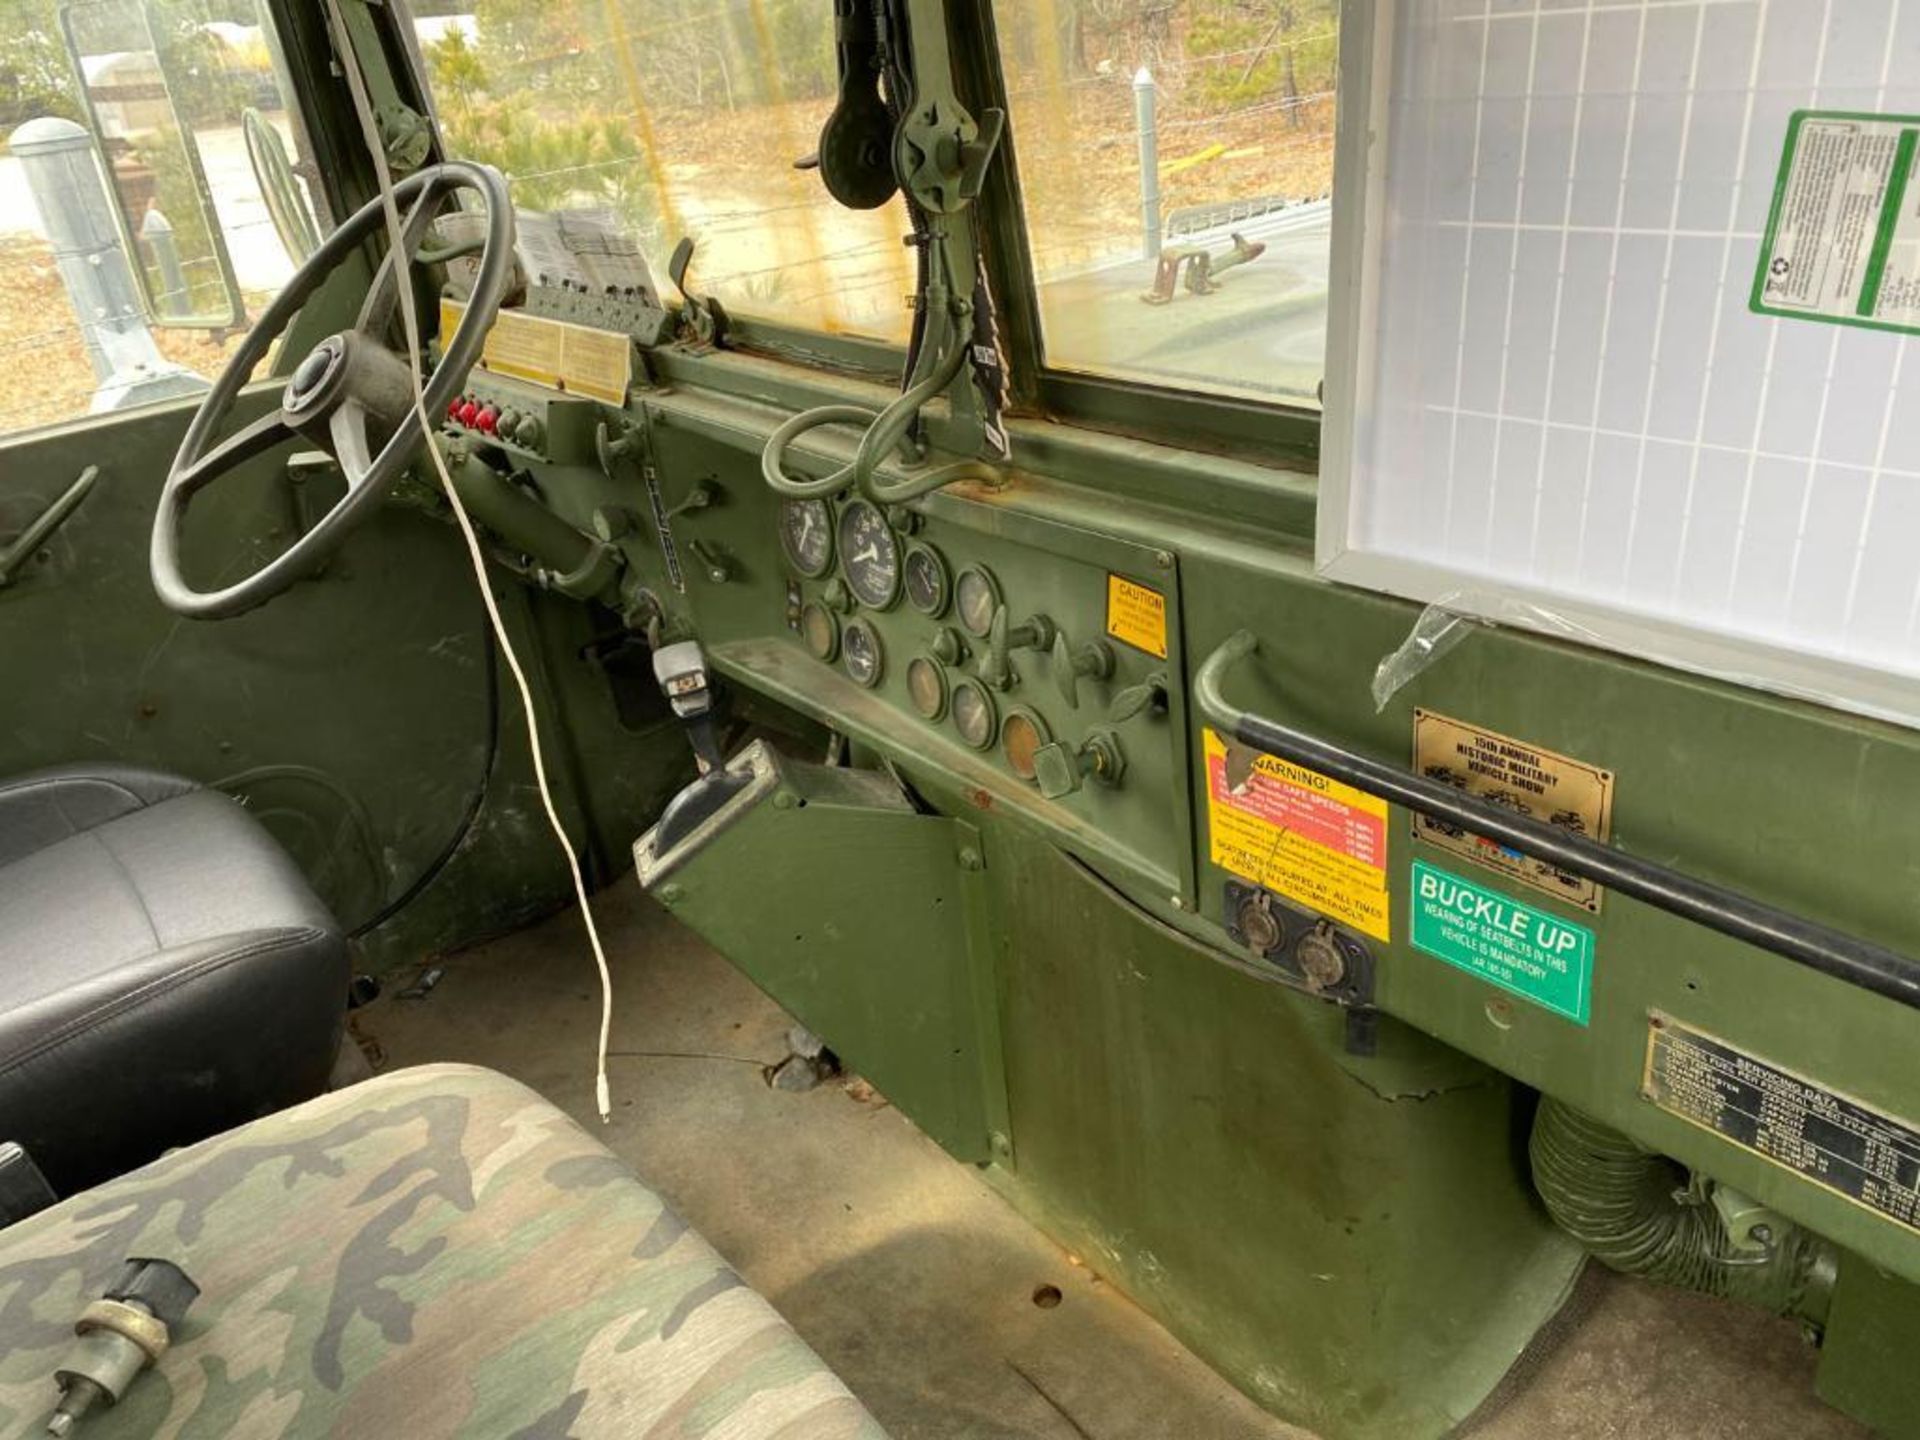 1985 AM GENERAL 2-1/2-Ton 6X6 Military Vehicle - Image 19 of 56